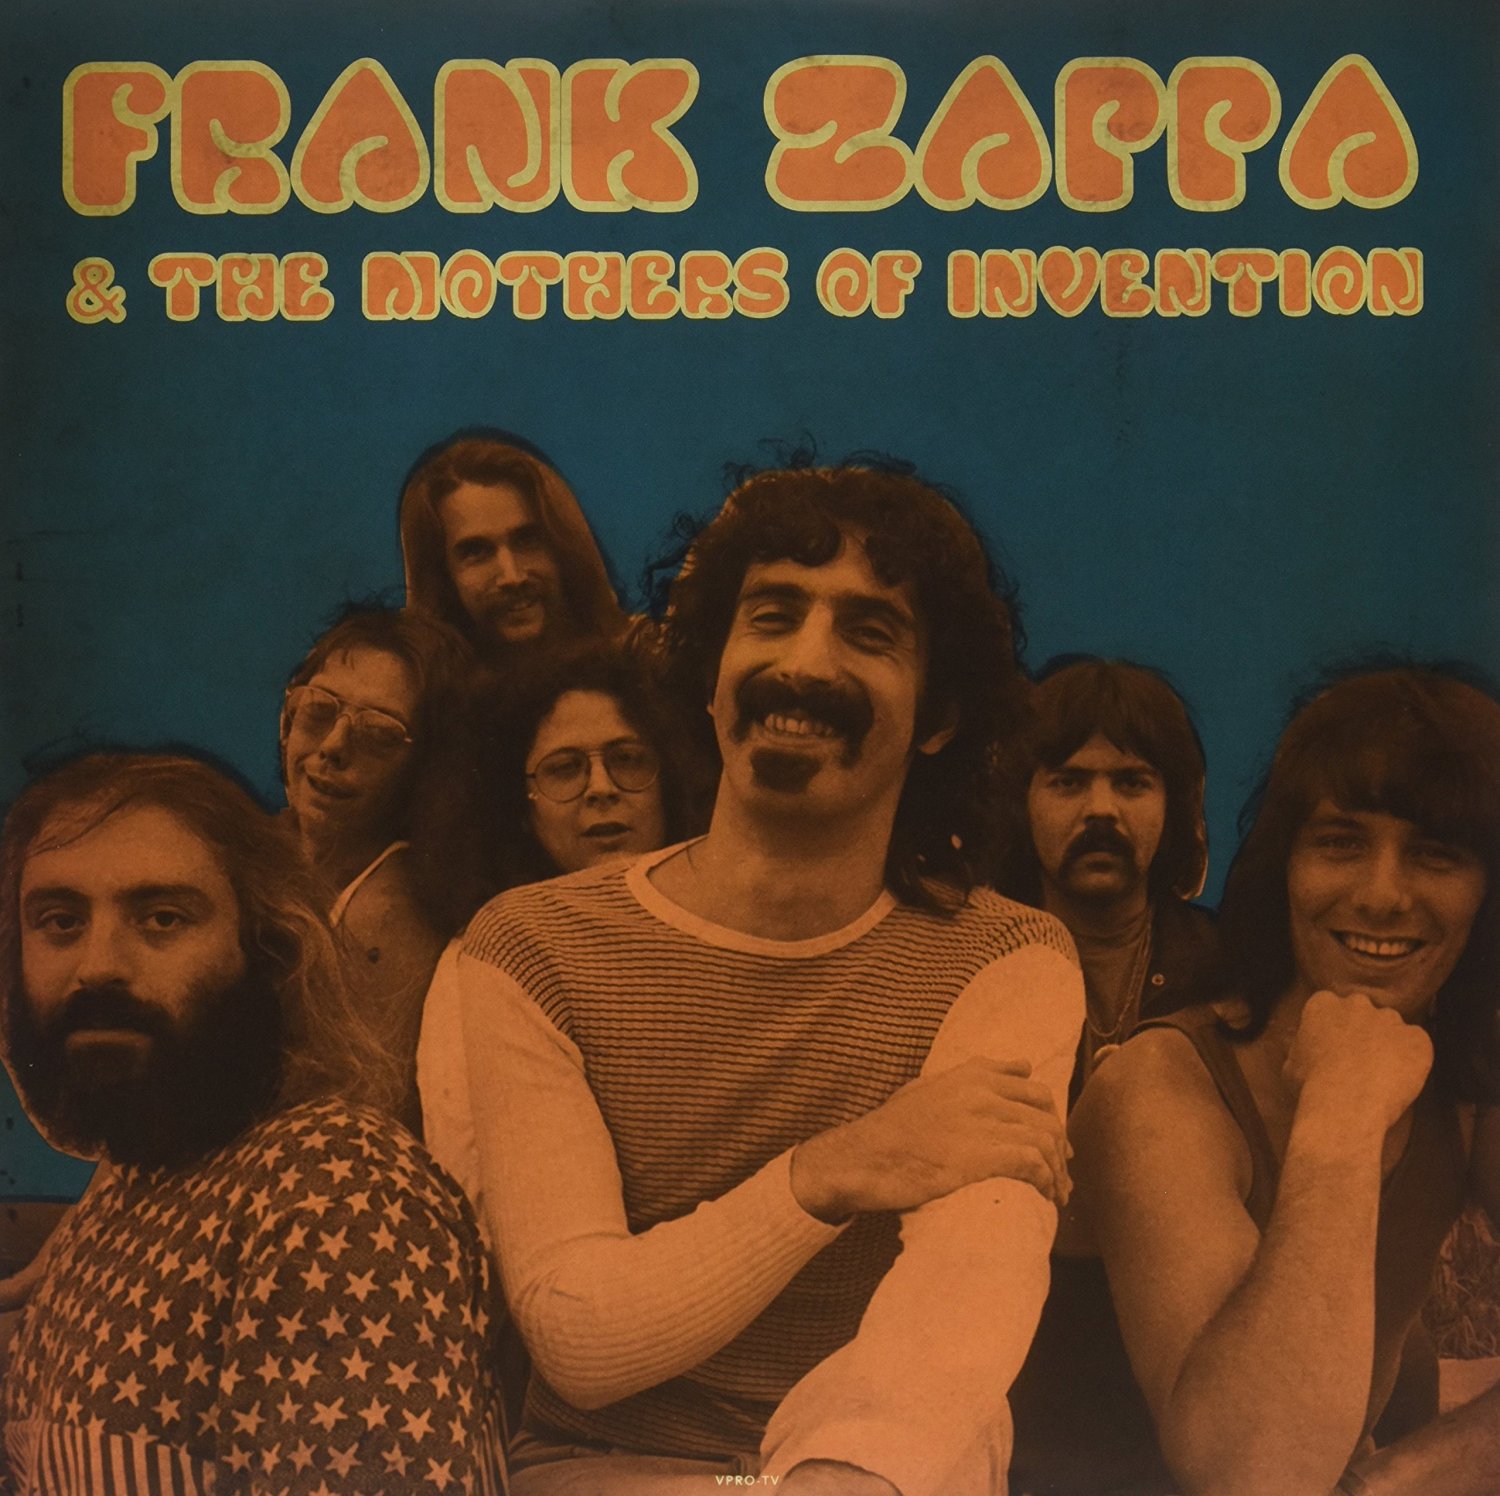 Live at the Piknik Show in Uddel, June 18th 1970 Frank Zappa - Vinyl | Frank Zappa, The Mothers of Invention